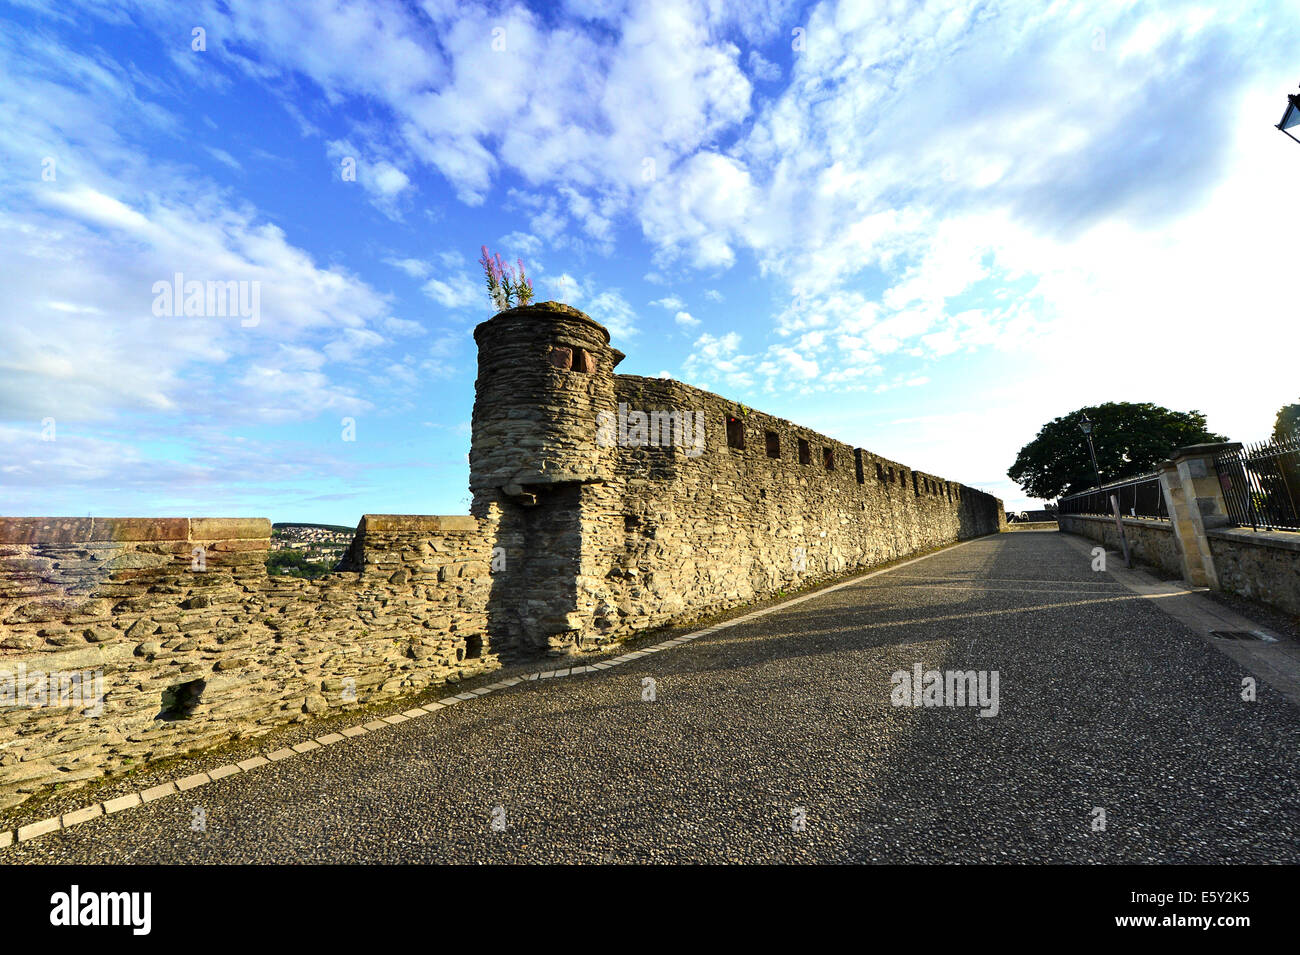 17th century Walls of Derry, Londonderry, Northern Ireland. Stock Photo